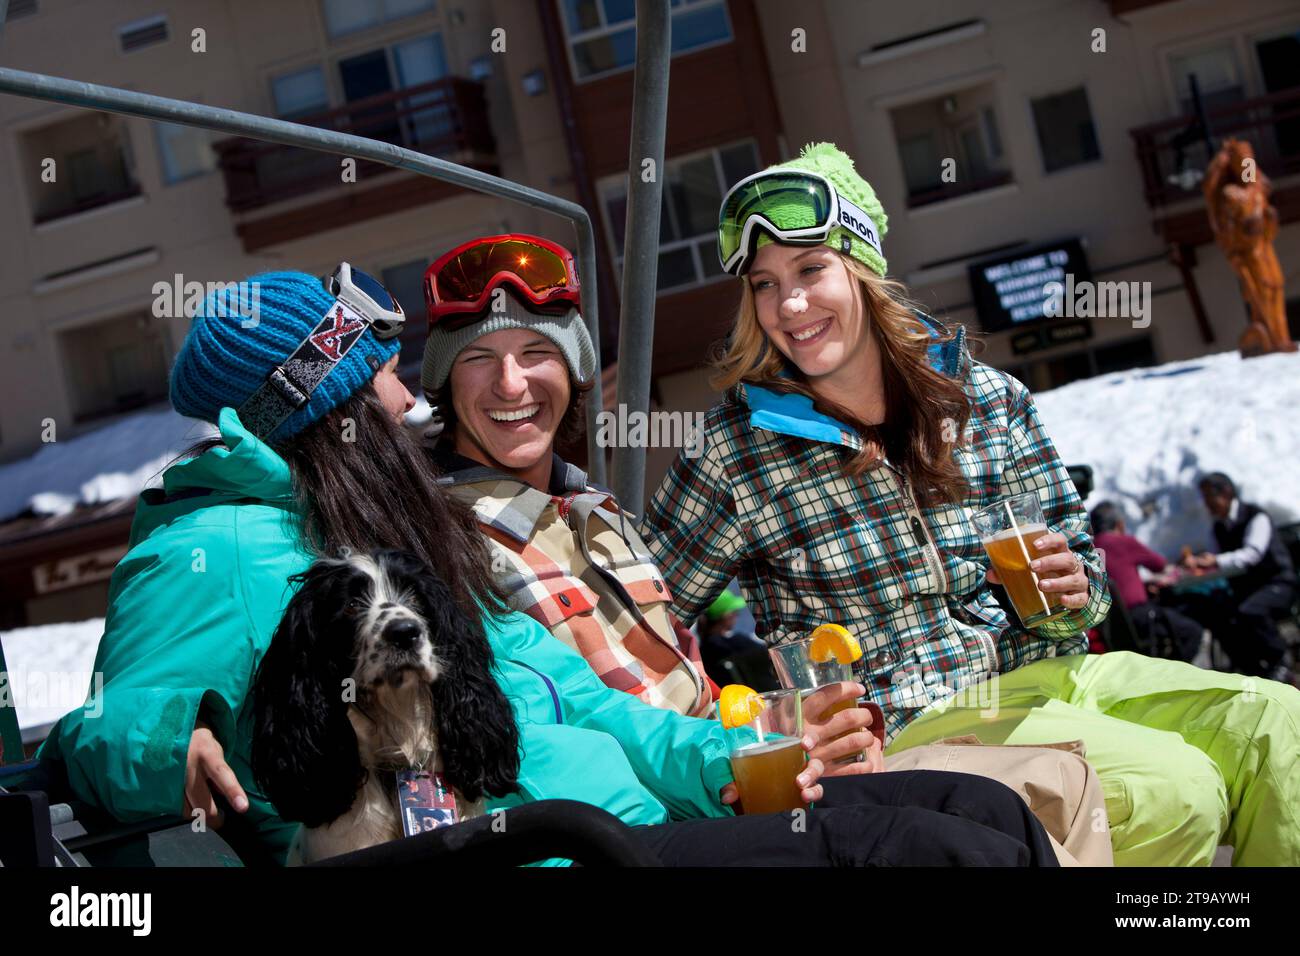 Three friends (one male and two females) hanging out with beers and a dog in front of a ski resort. Stock Photo